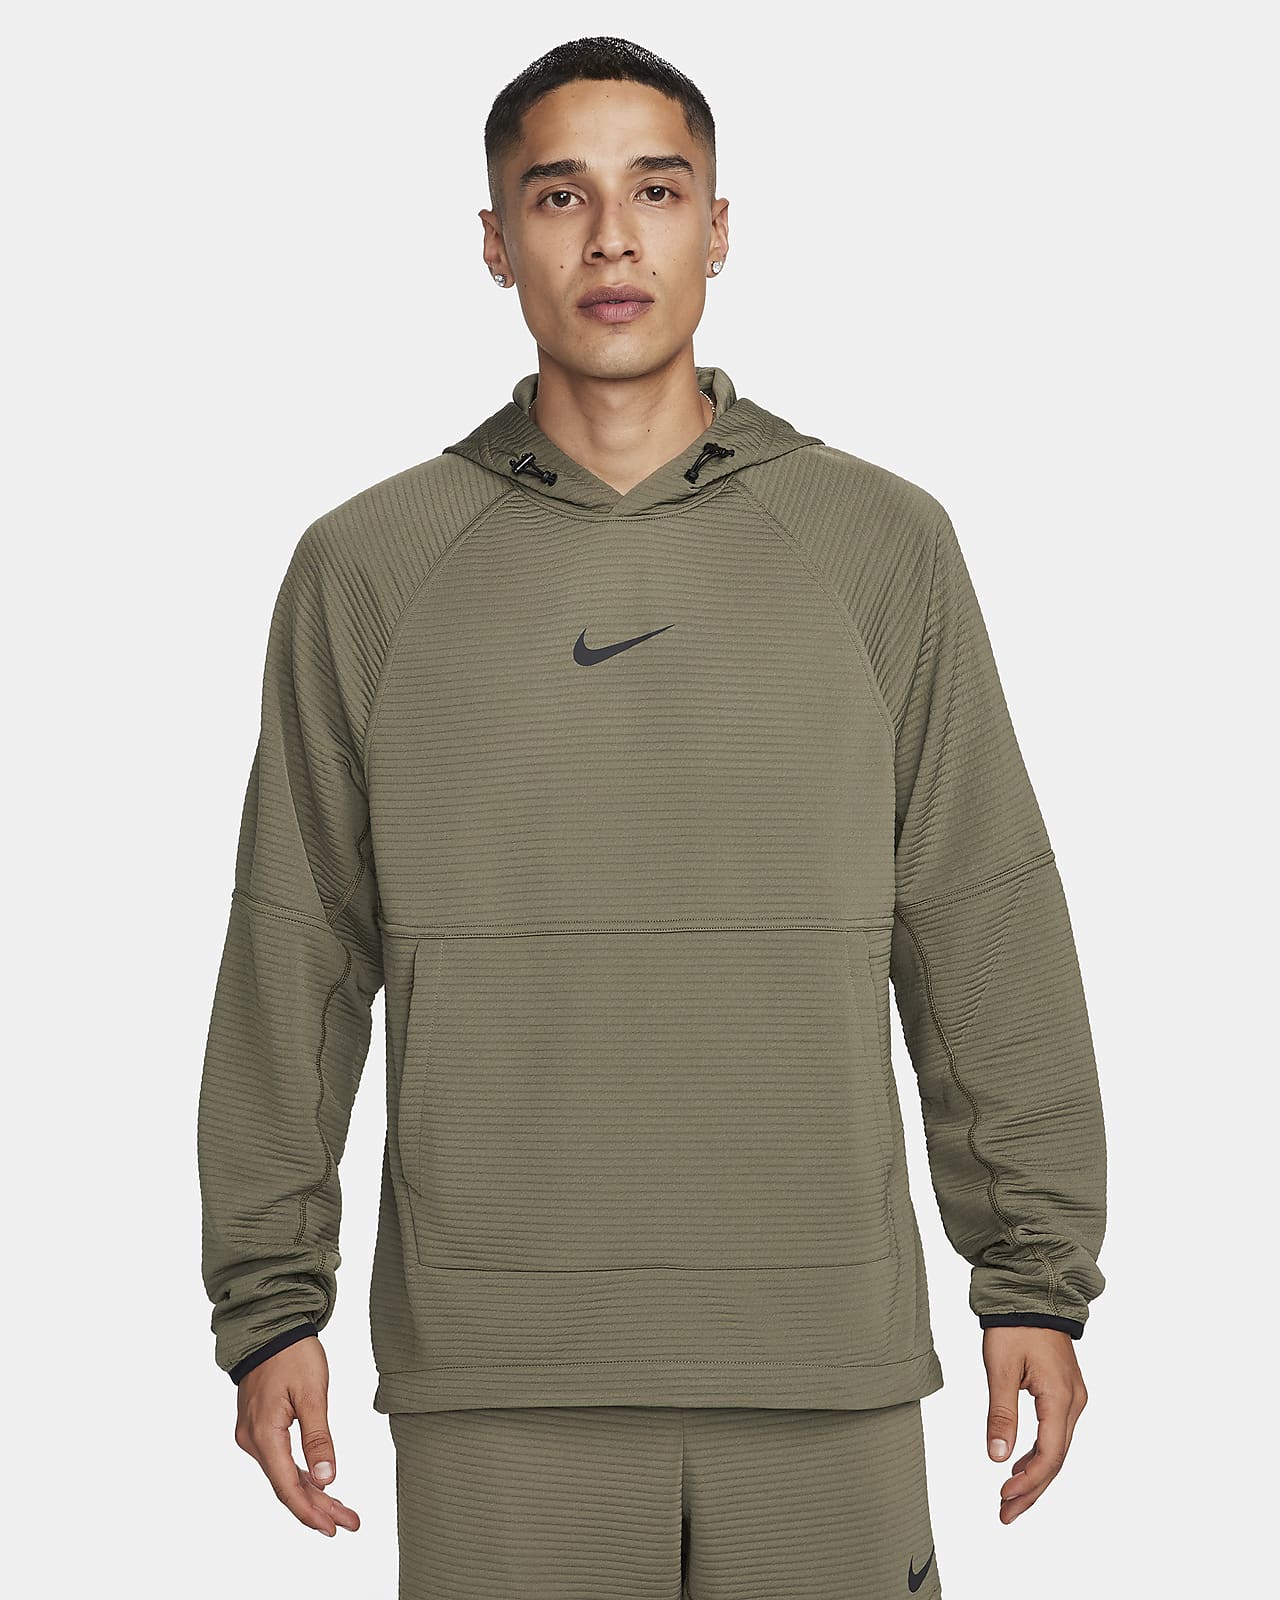 Has anyone tried on the new tough training crew neck? Thoughts